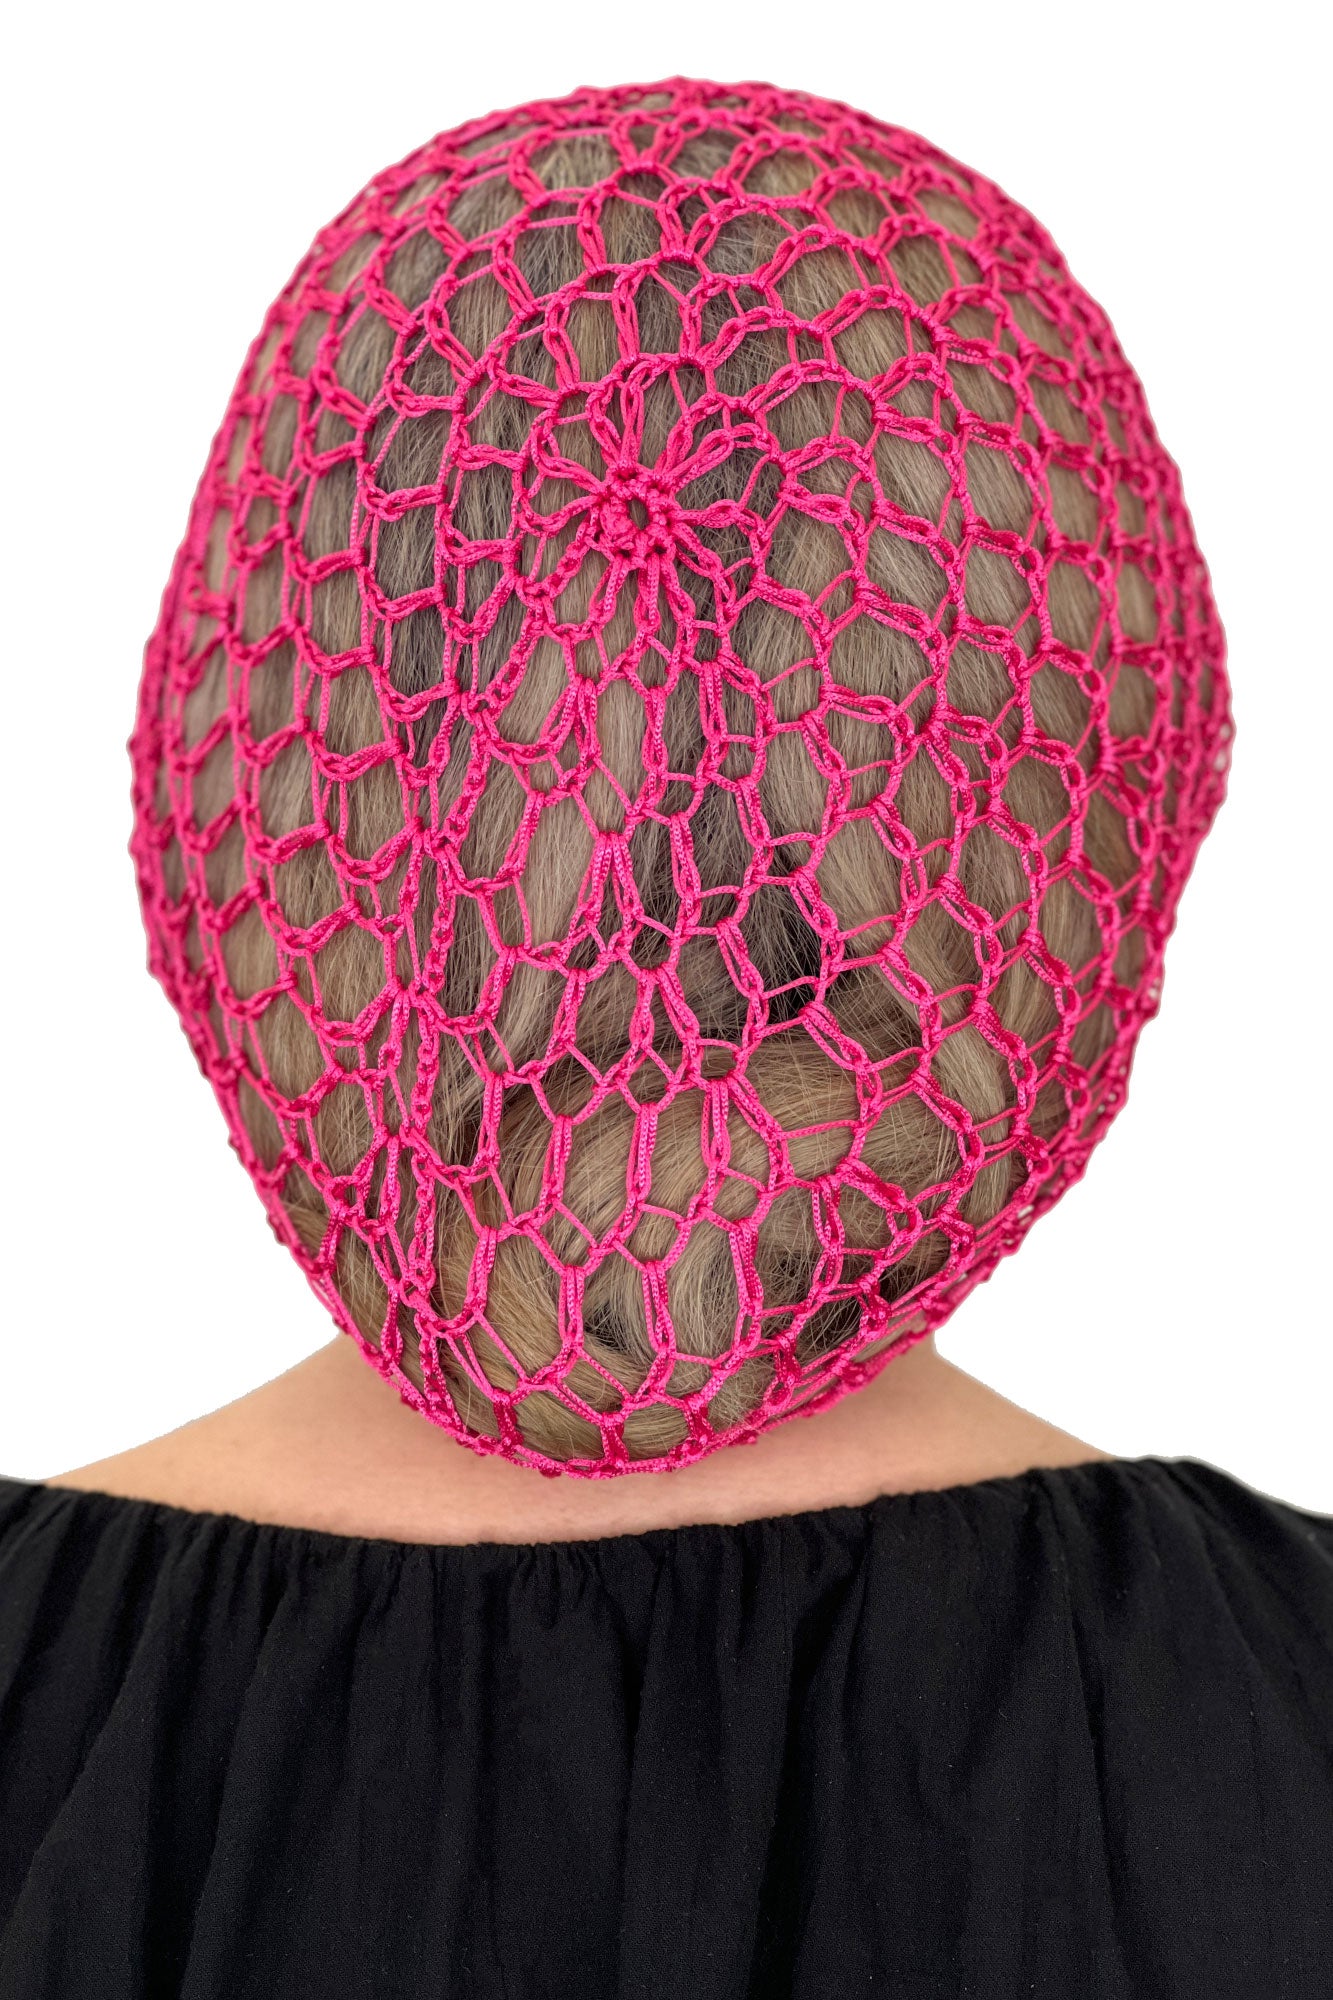 Snood in Hot Pink